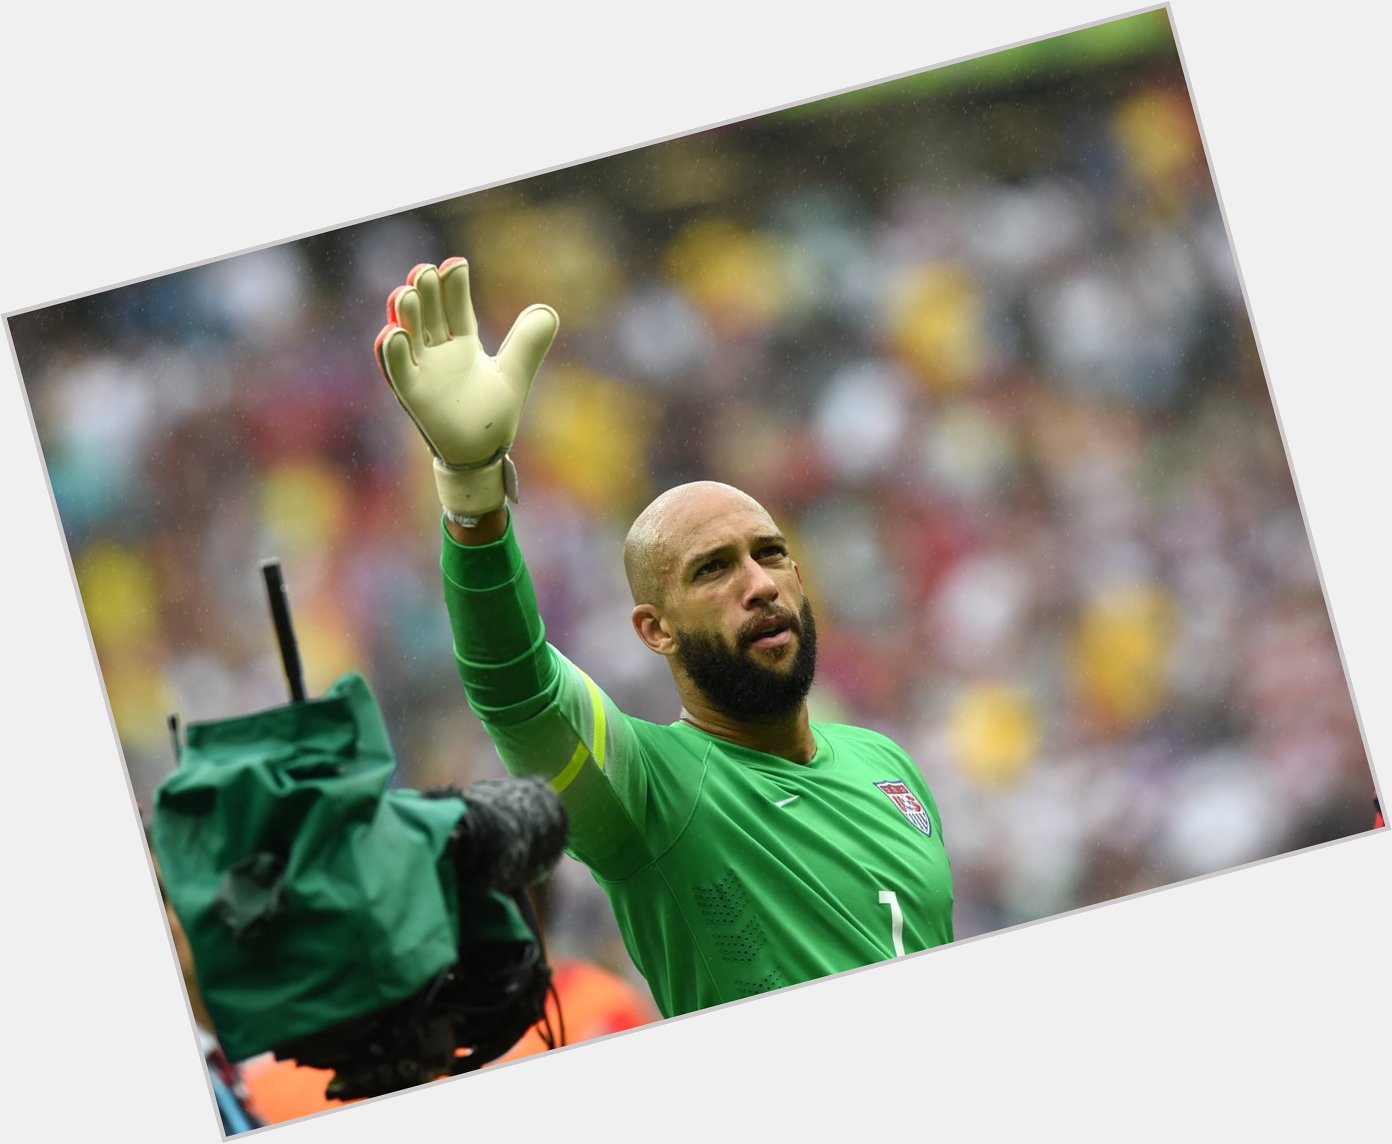  Happy birthday Tim Howard

This legend holds the 3rd highest number of PL clean sheets in history...  